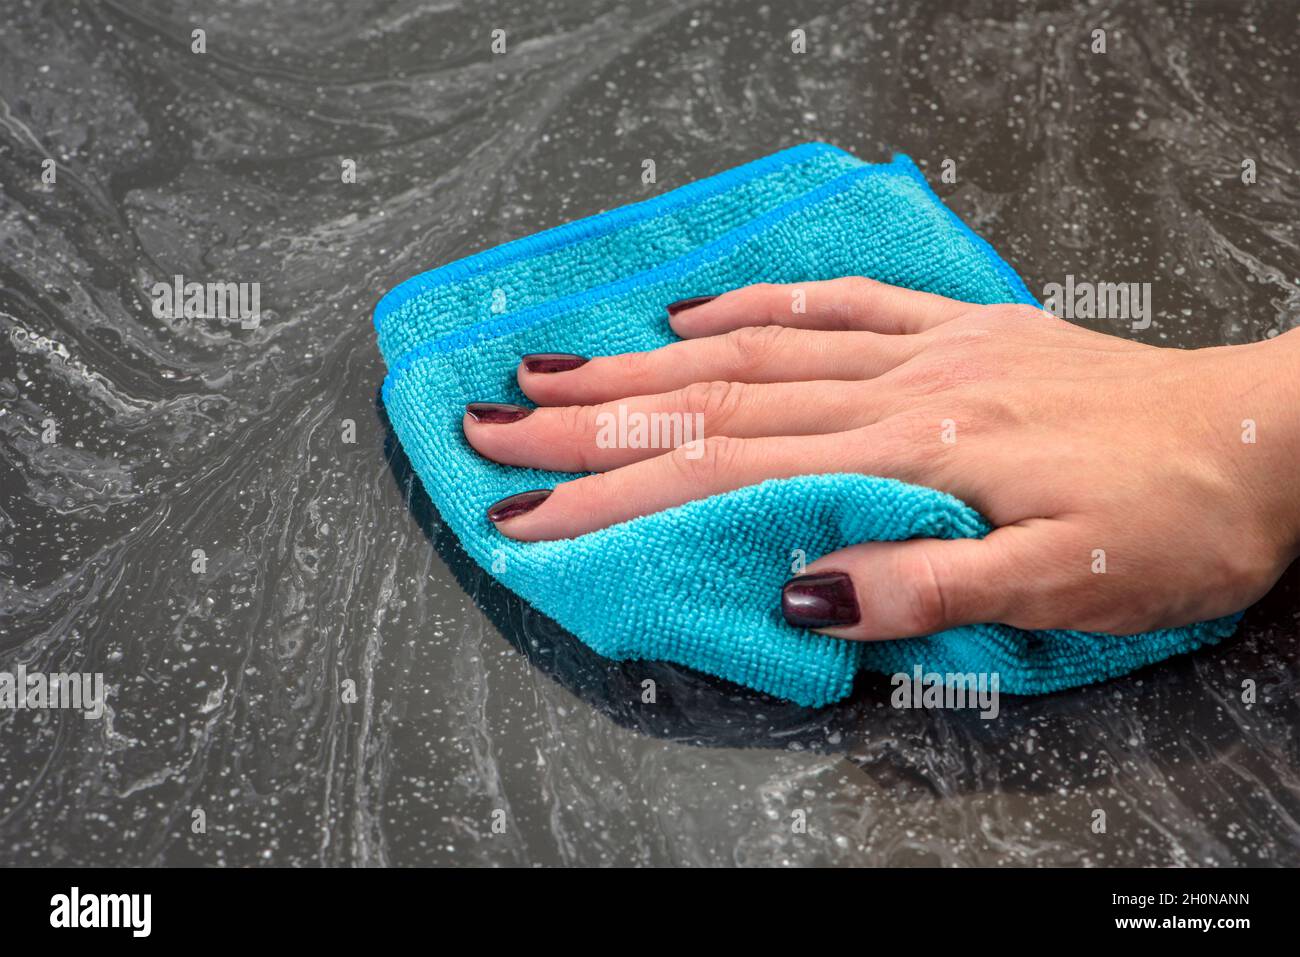 Cleaning the countertop. Caring for countertops in the kitchen or bathroom. Cleaning stone, marble or artificial stone countertops. Woman's hand wipes Stock Photo